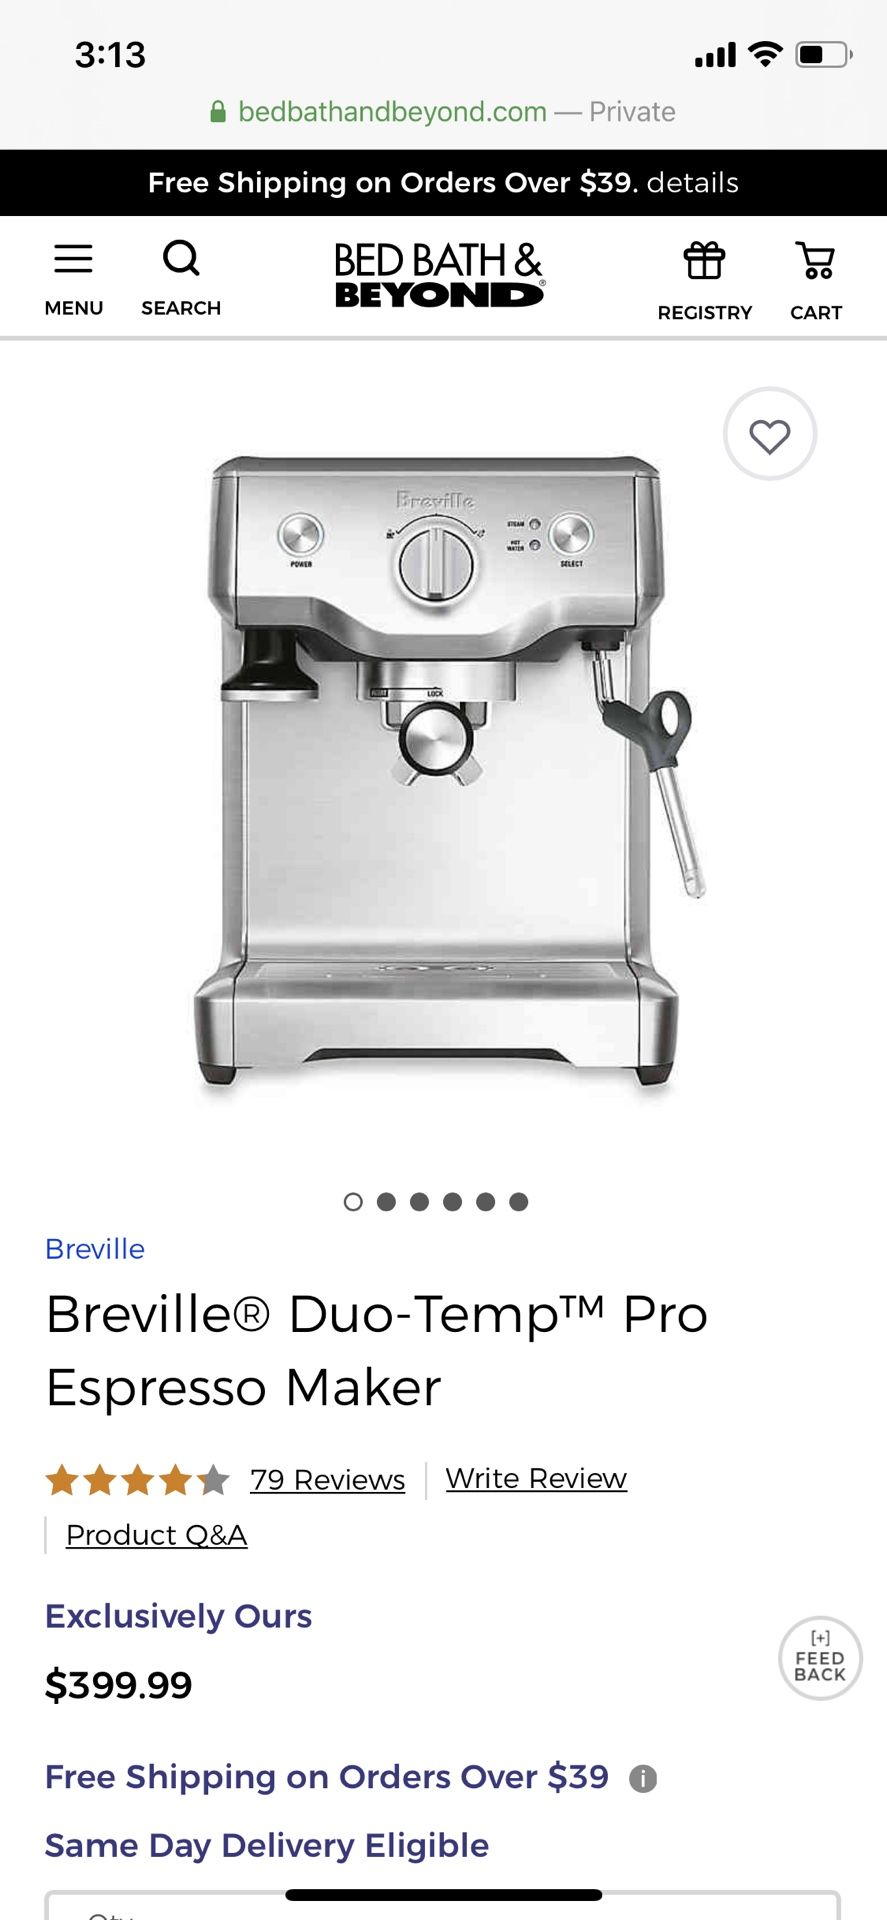 Breville® Duo-Temp™ Pro Espresso Maker and a Chefman Coffee Grinder Electric Burr Mill